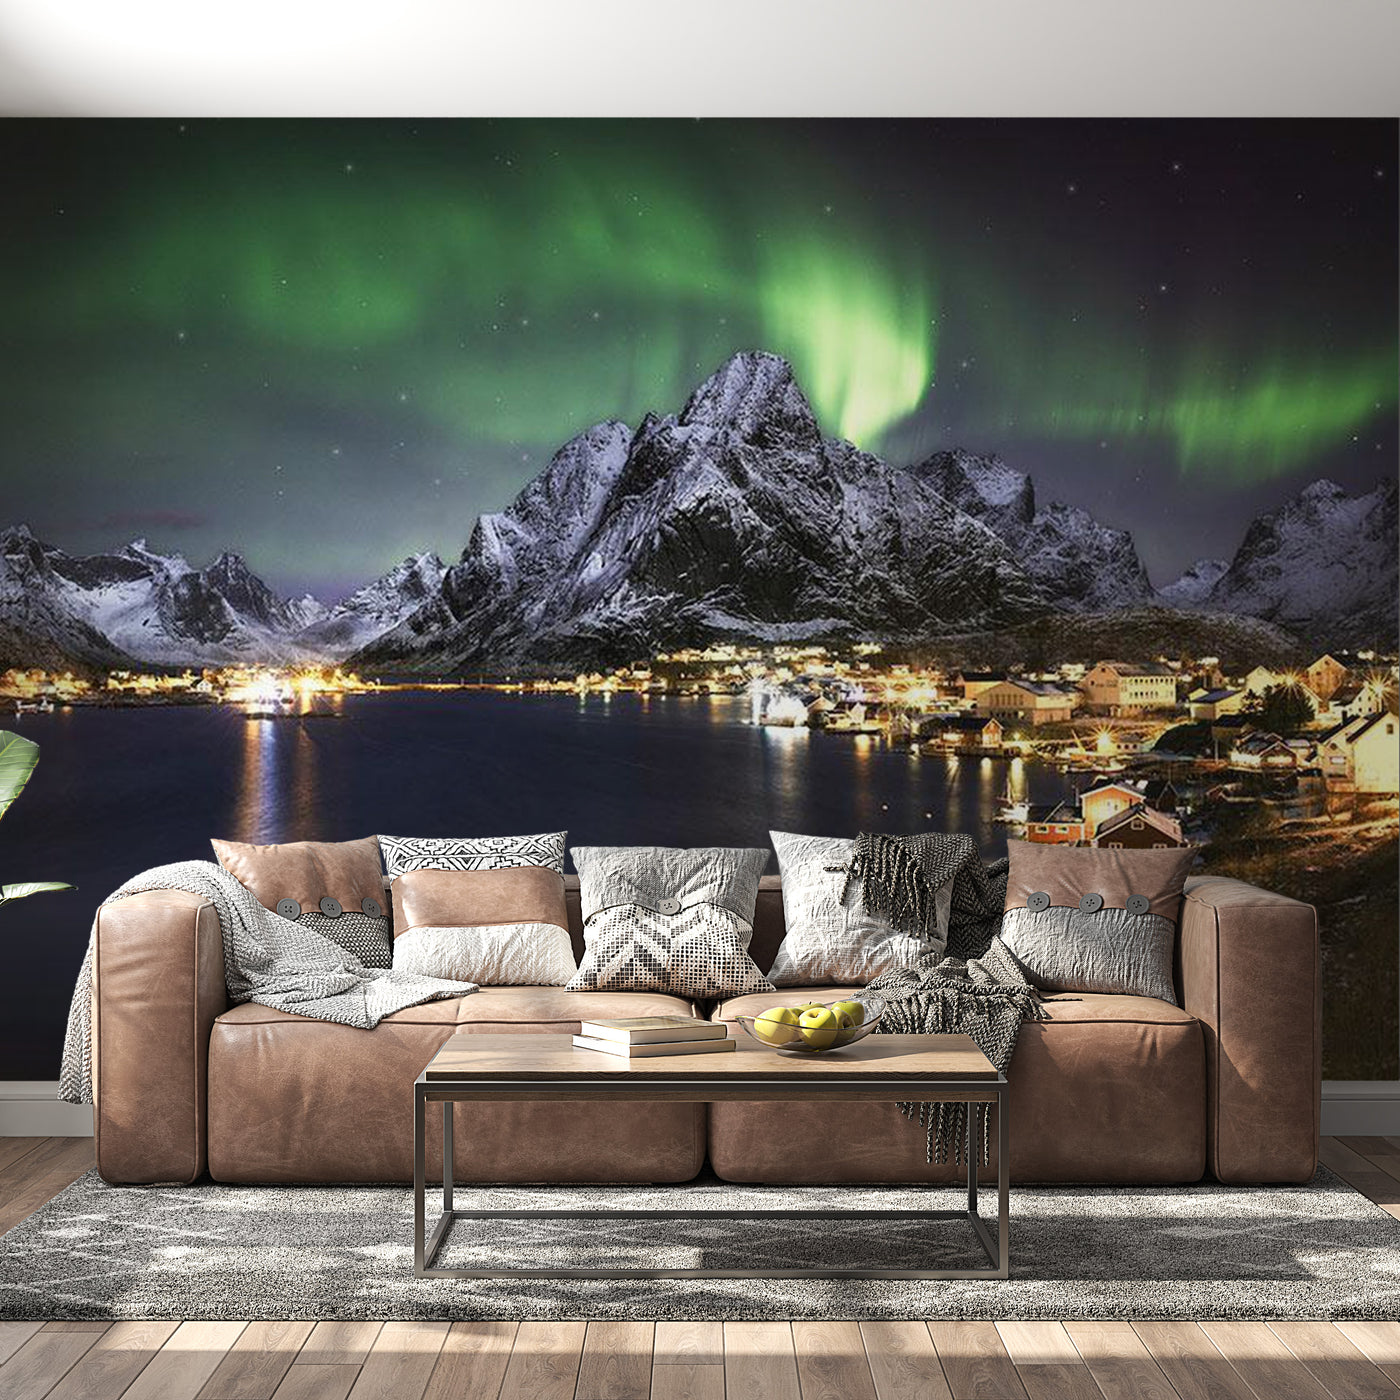 Peel & Stick Nature Wall Mural - Aurora Borealis - Removable Wall Decals